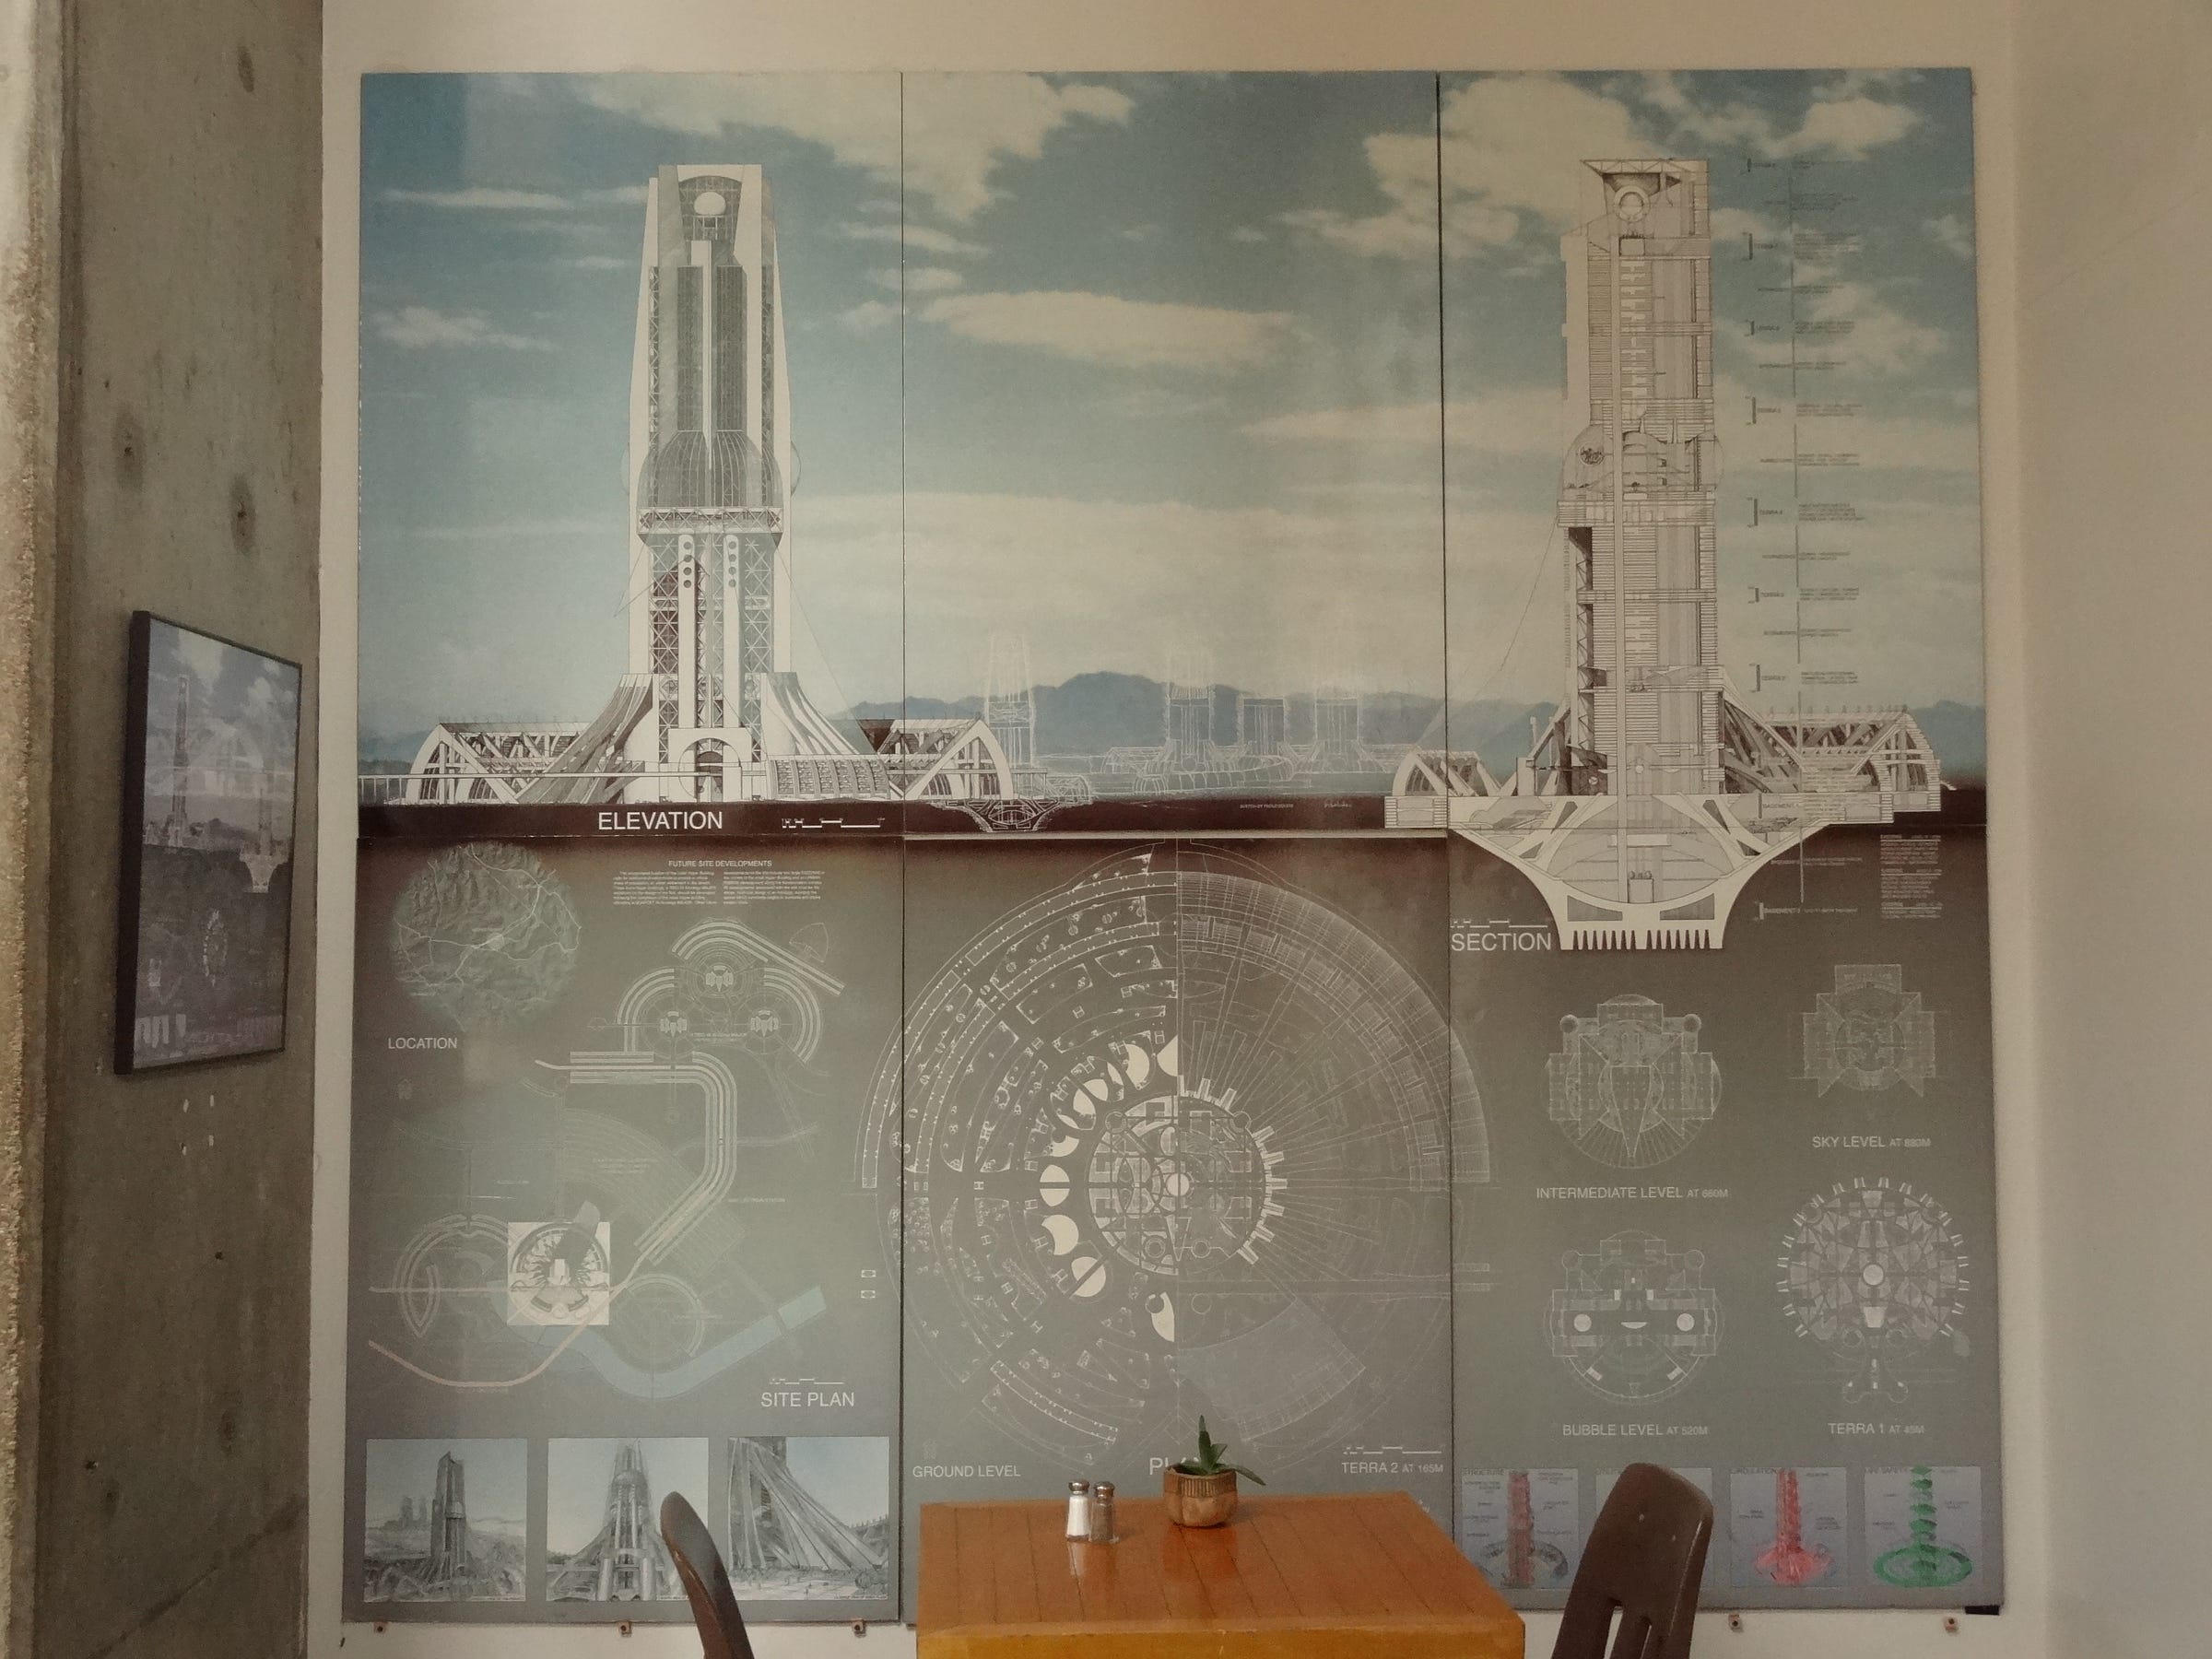 Arcosanti cafeteria with original schematic drawing in large size on the wall